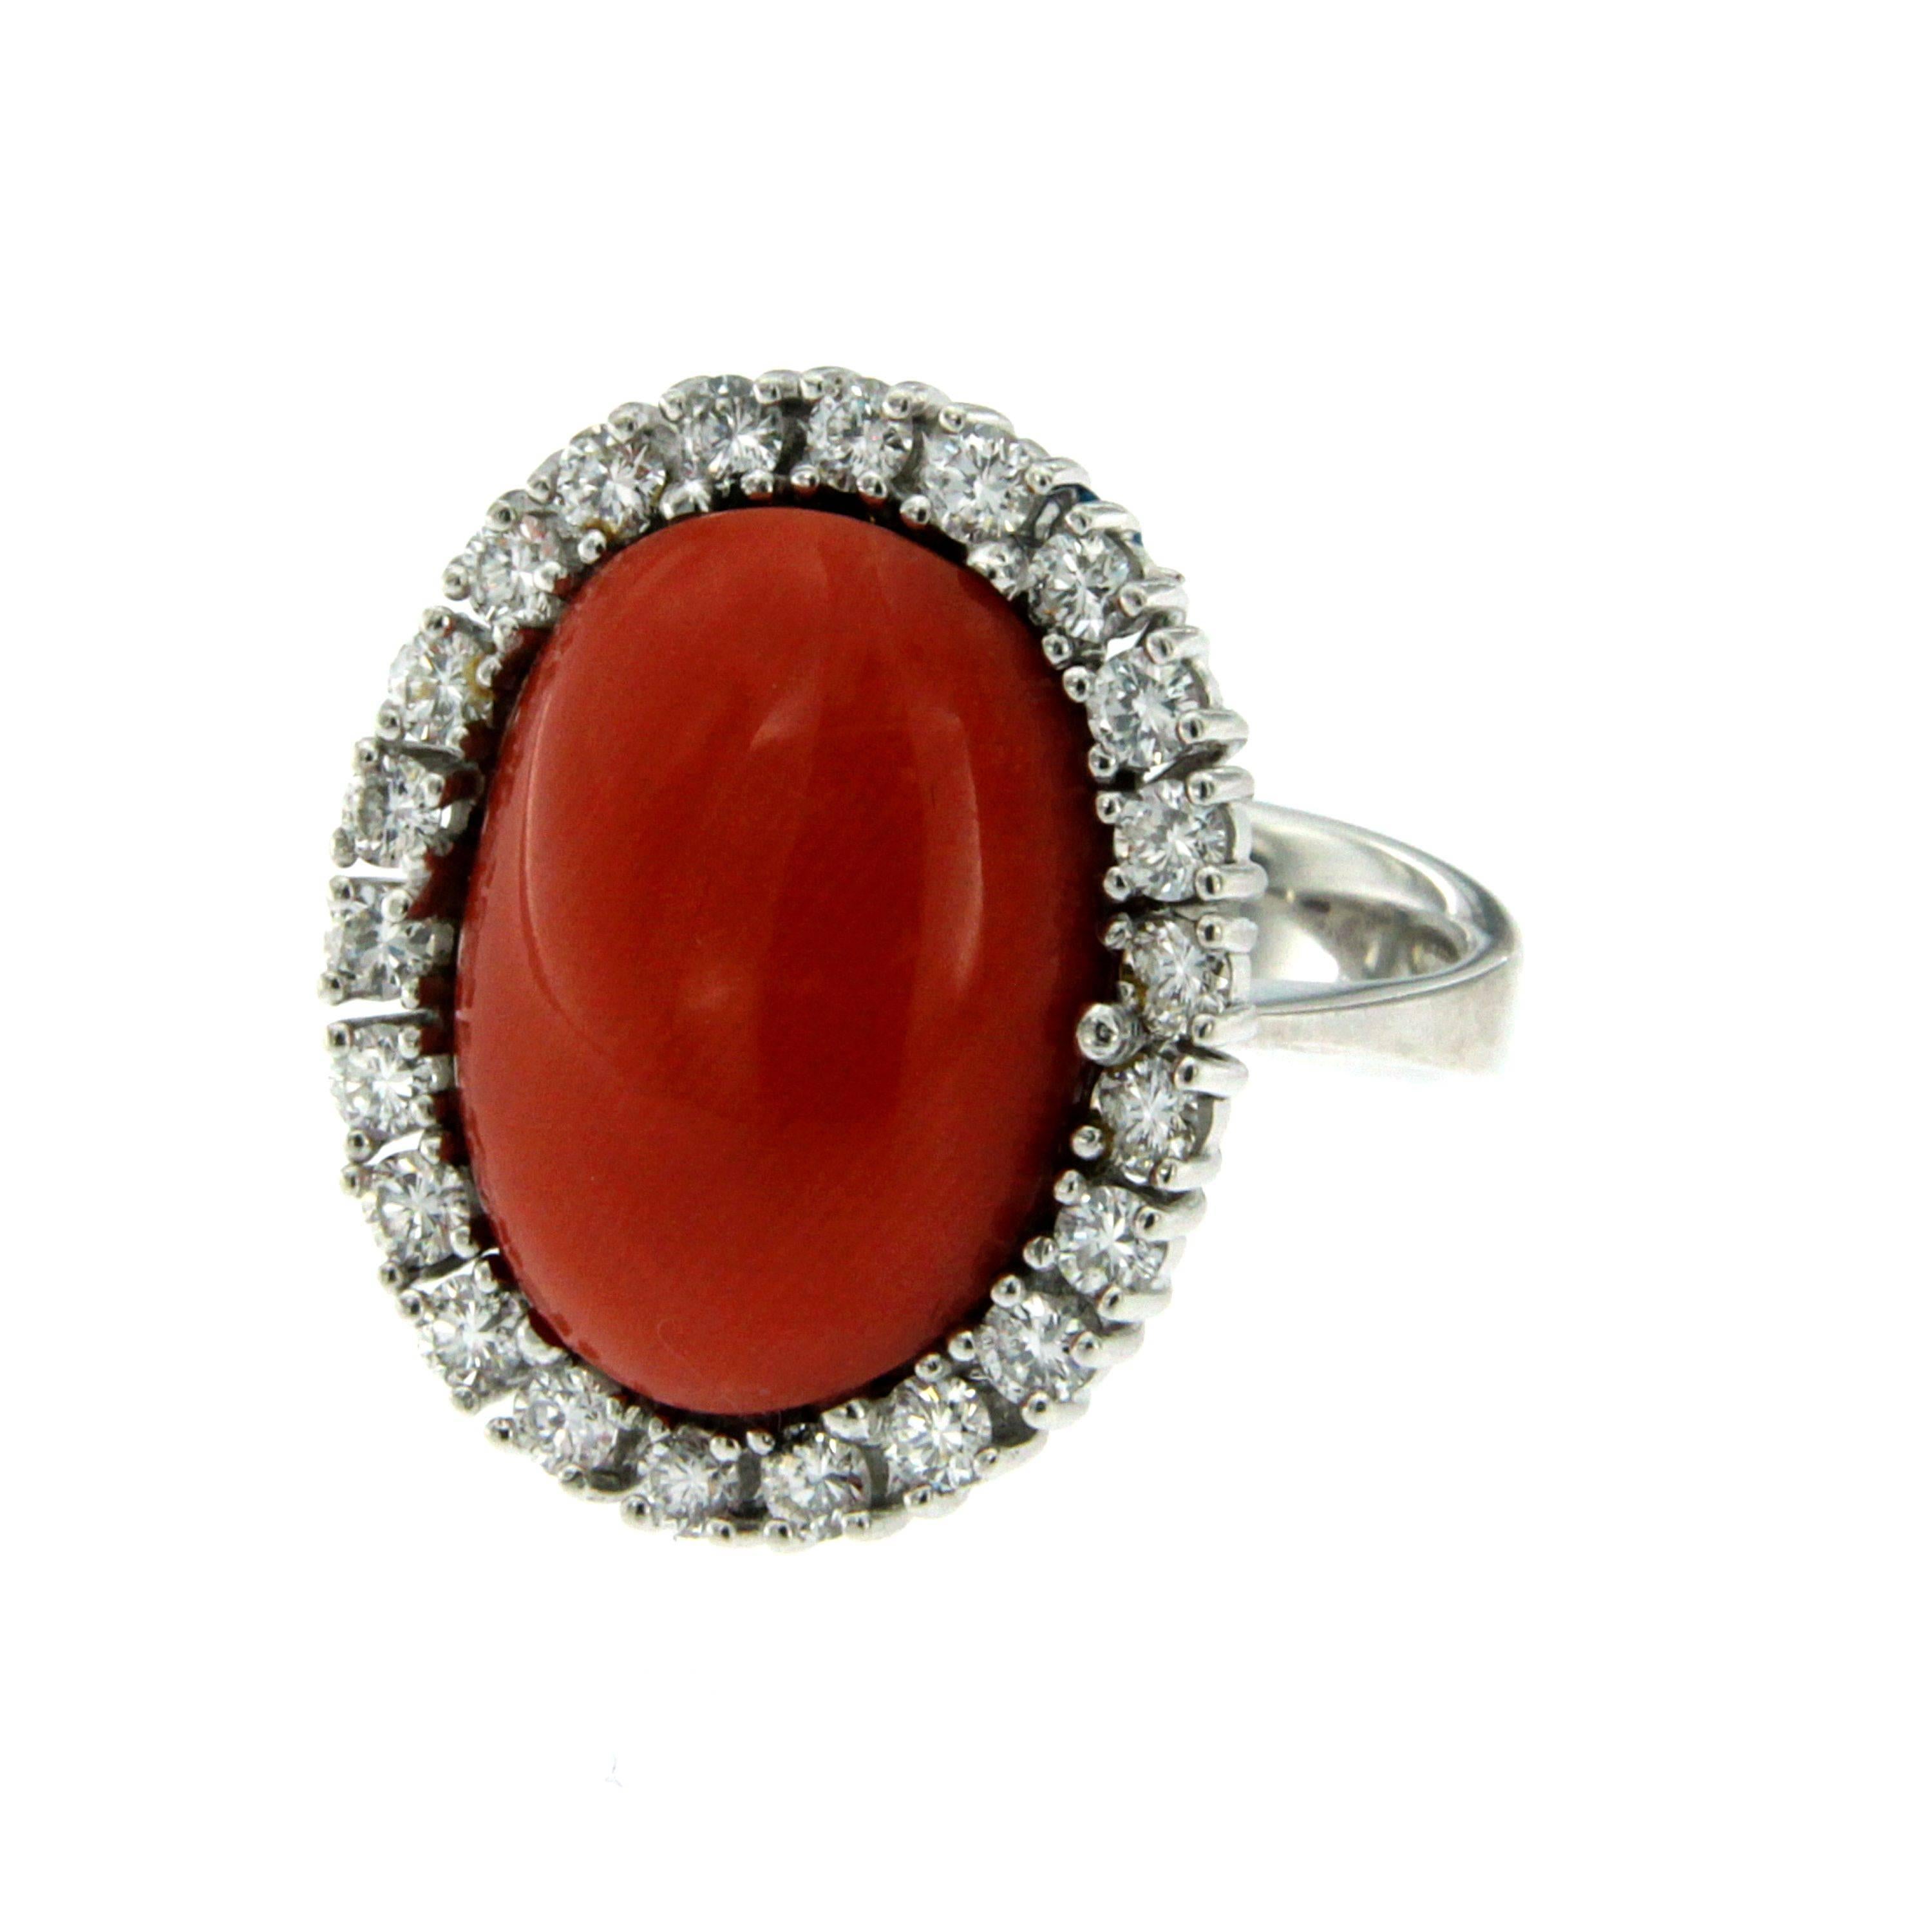 A beautiful vintage ring out from 1960s Origin Italy, hand crafted of solid 18Kt white gold. 

The ring feautures a Natural wide Cabochon Coral, of the greatest variety, Rubrum, 100% natural not dyed or worked with any resin or other synthetic